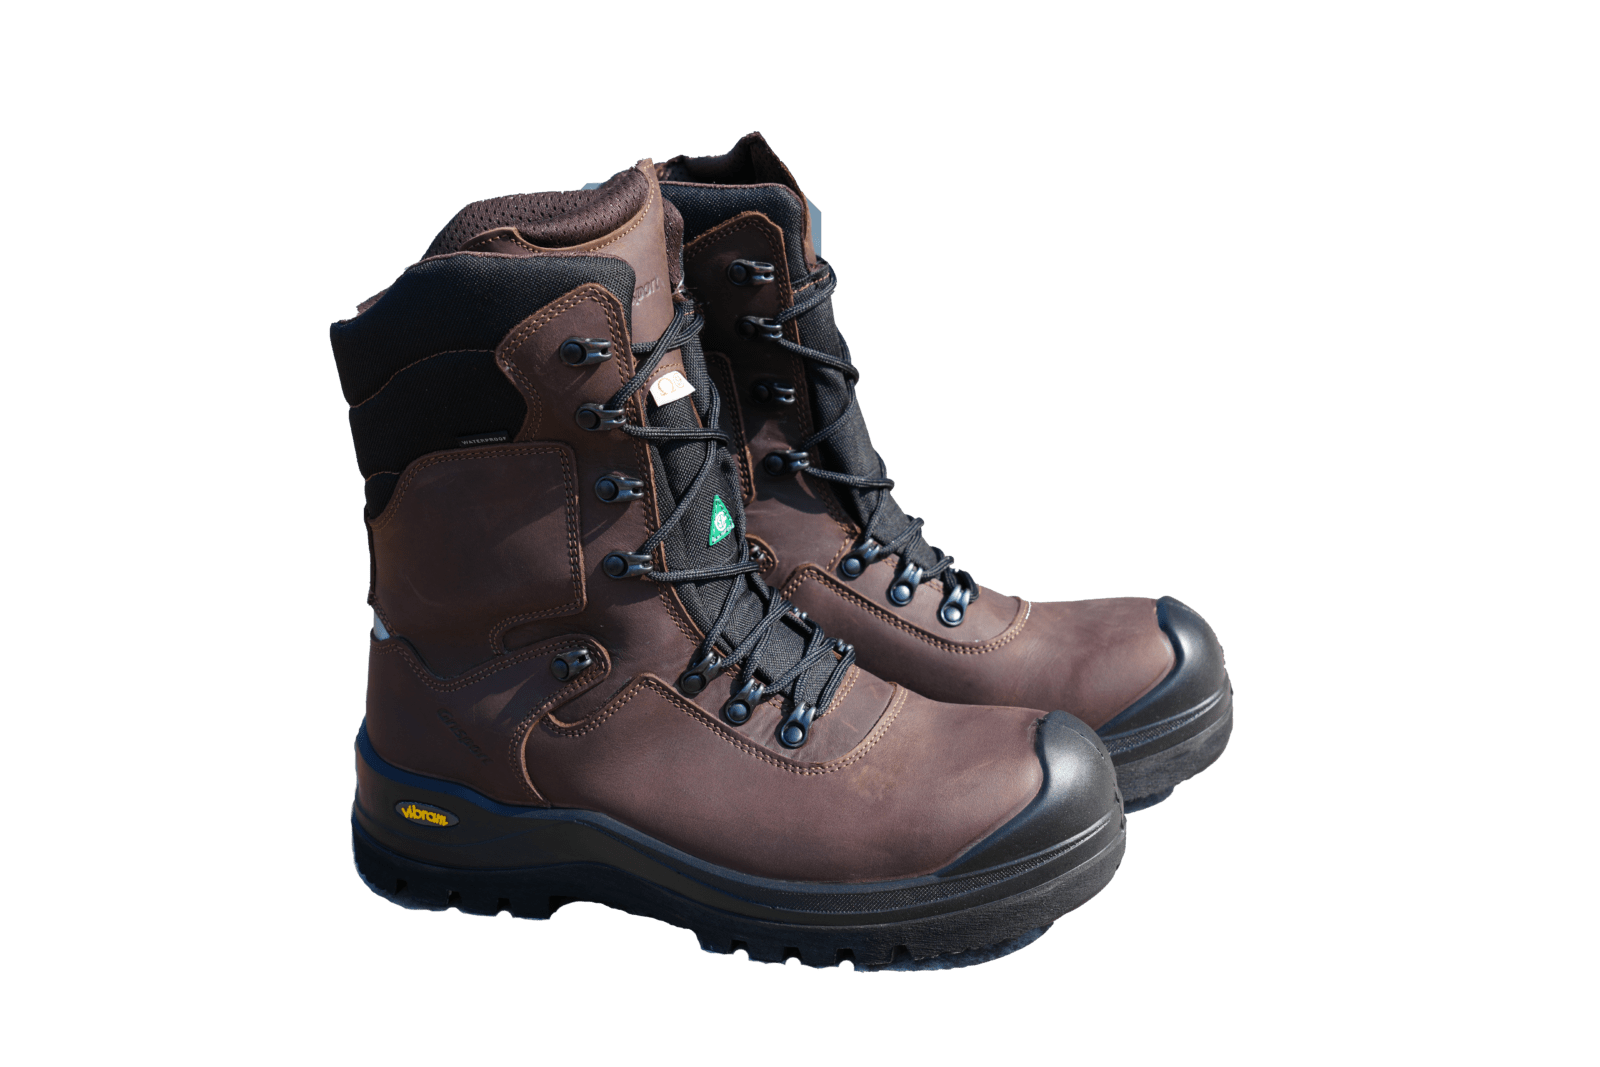 How to choose your hiking boots for winter? — Grisport Canada